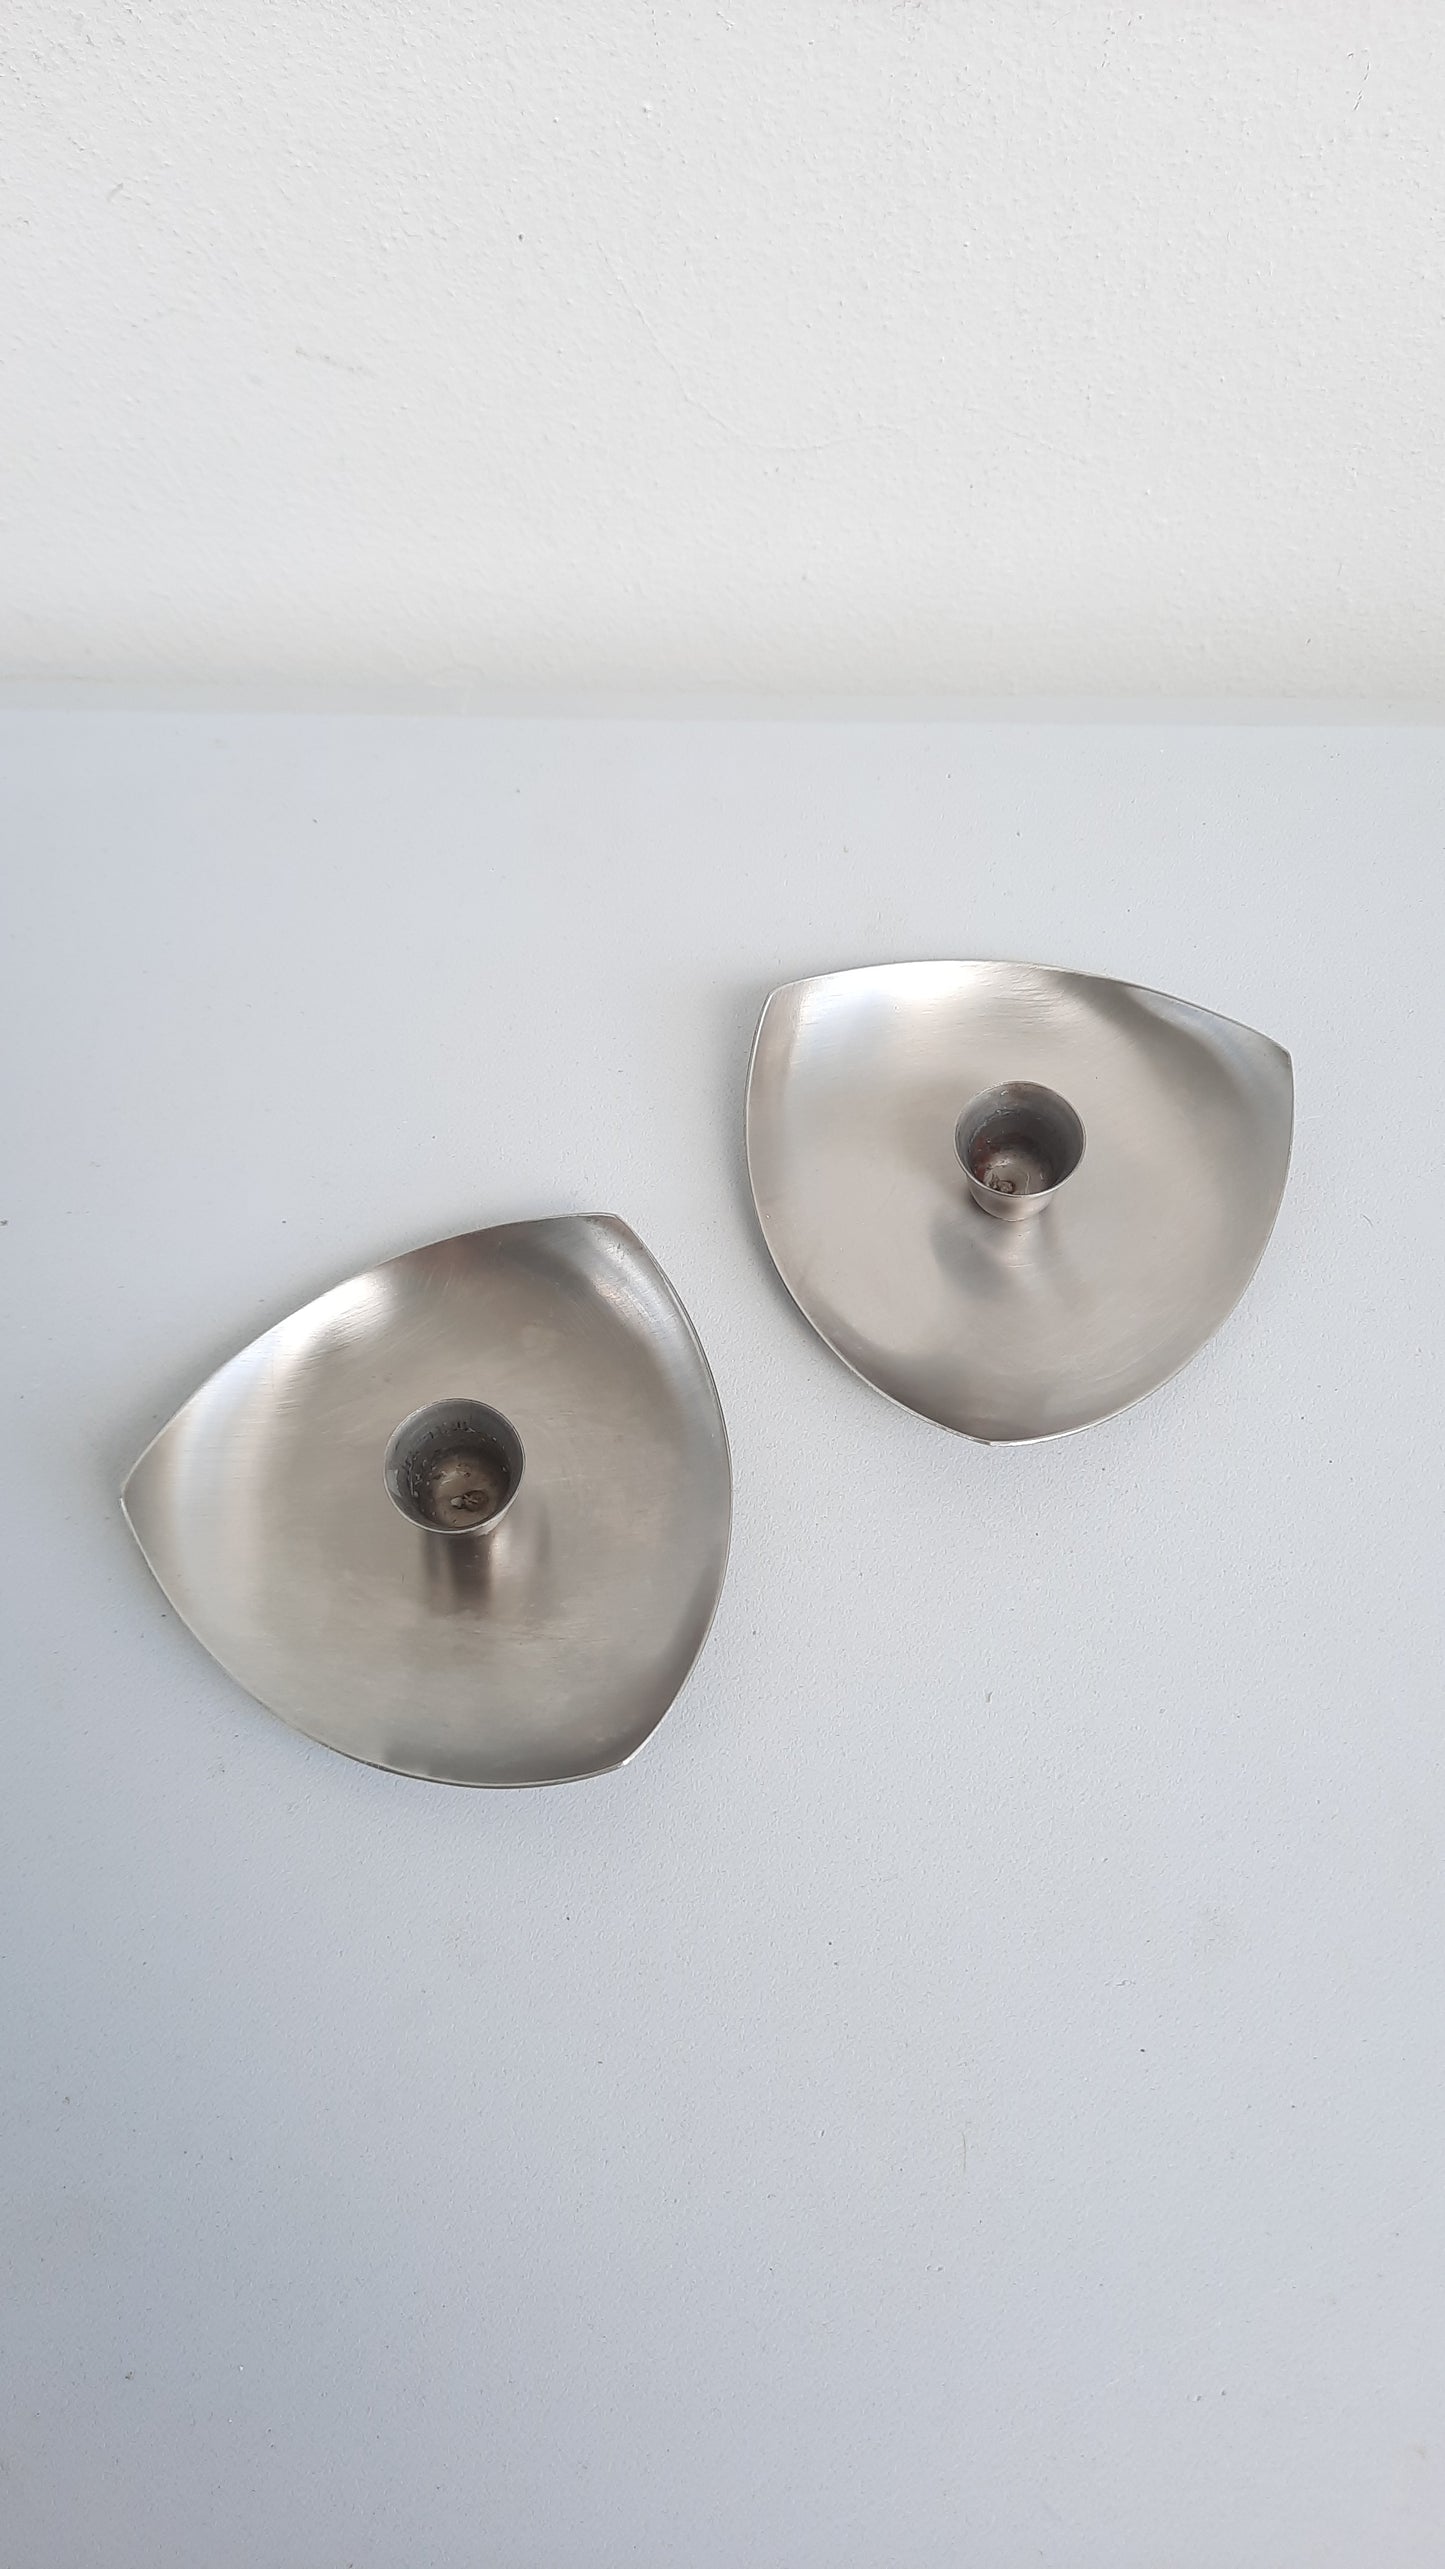 Set of 2 Mid-century Stainless Steel Candleholders